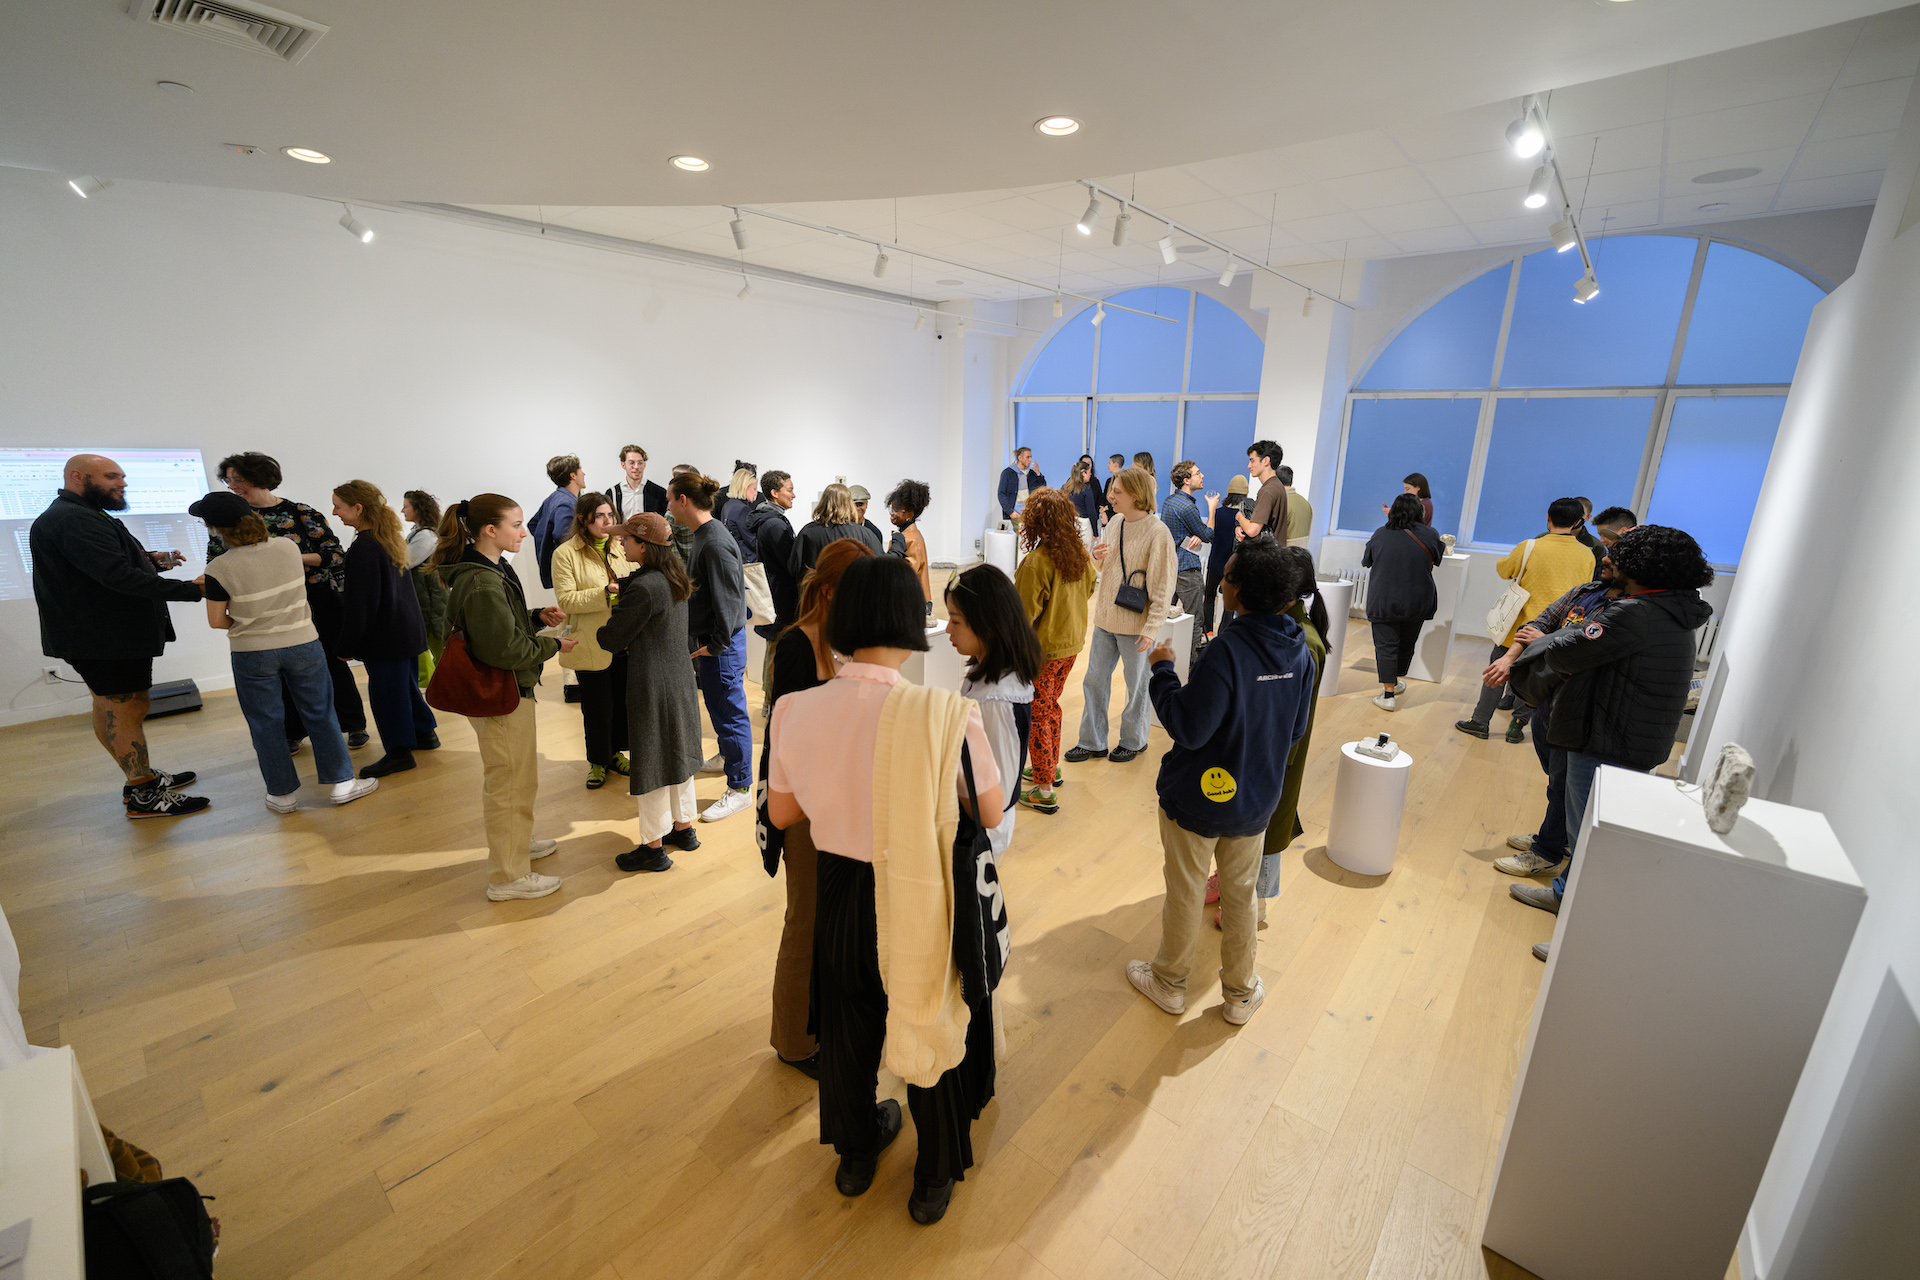 A room full of people visiting the exhibition